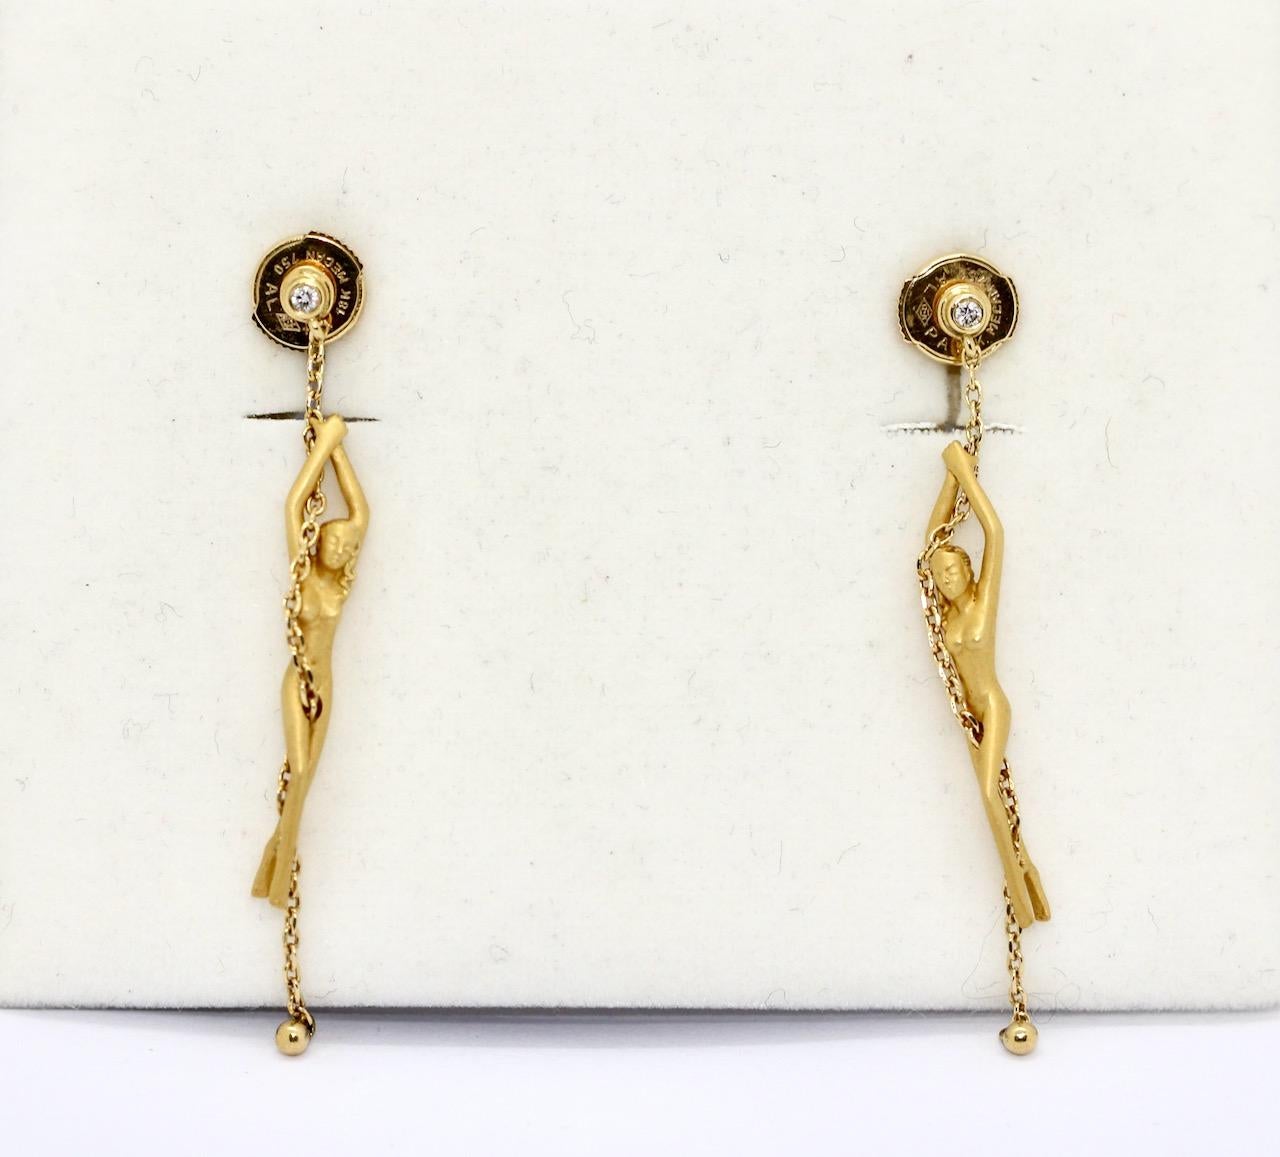 Carrera y Carrera Earrings in the form of a nude woman, 18k gold with diamonds.

Length from diamond to gold ball: 50mm.

Including original packaging and certificate of authenticity from our company.

We also offer the matching necklace with